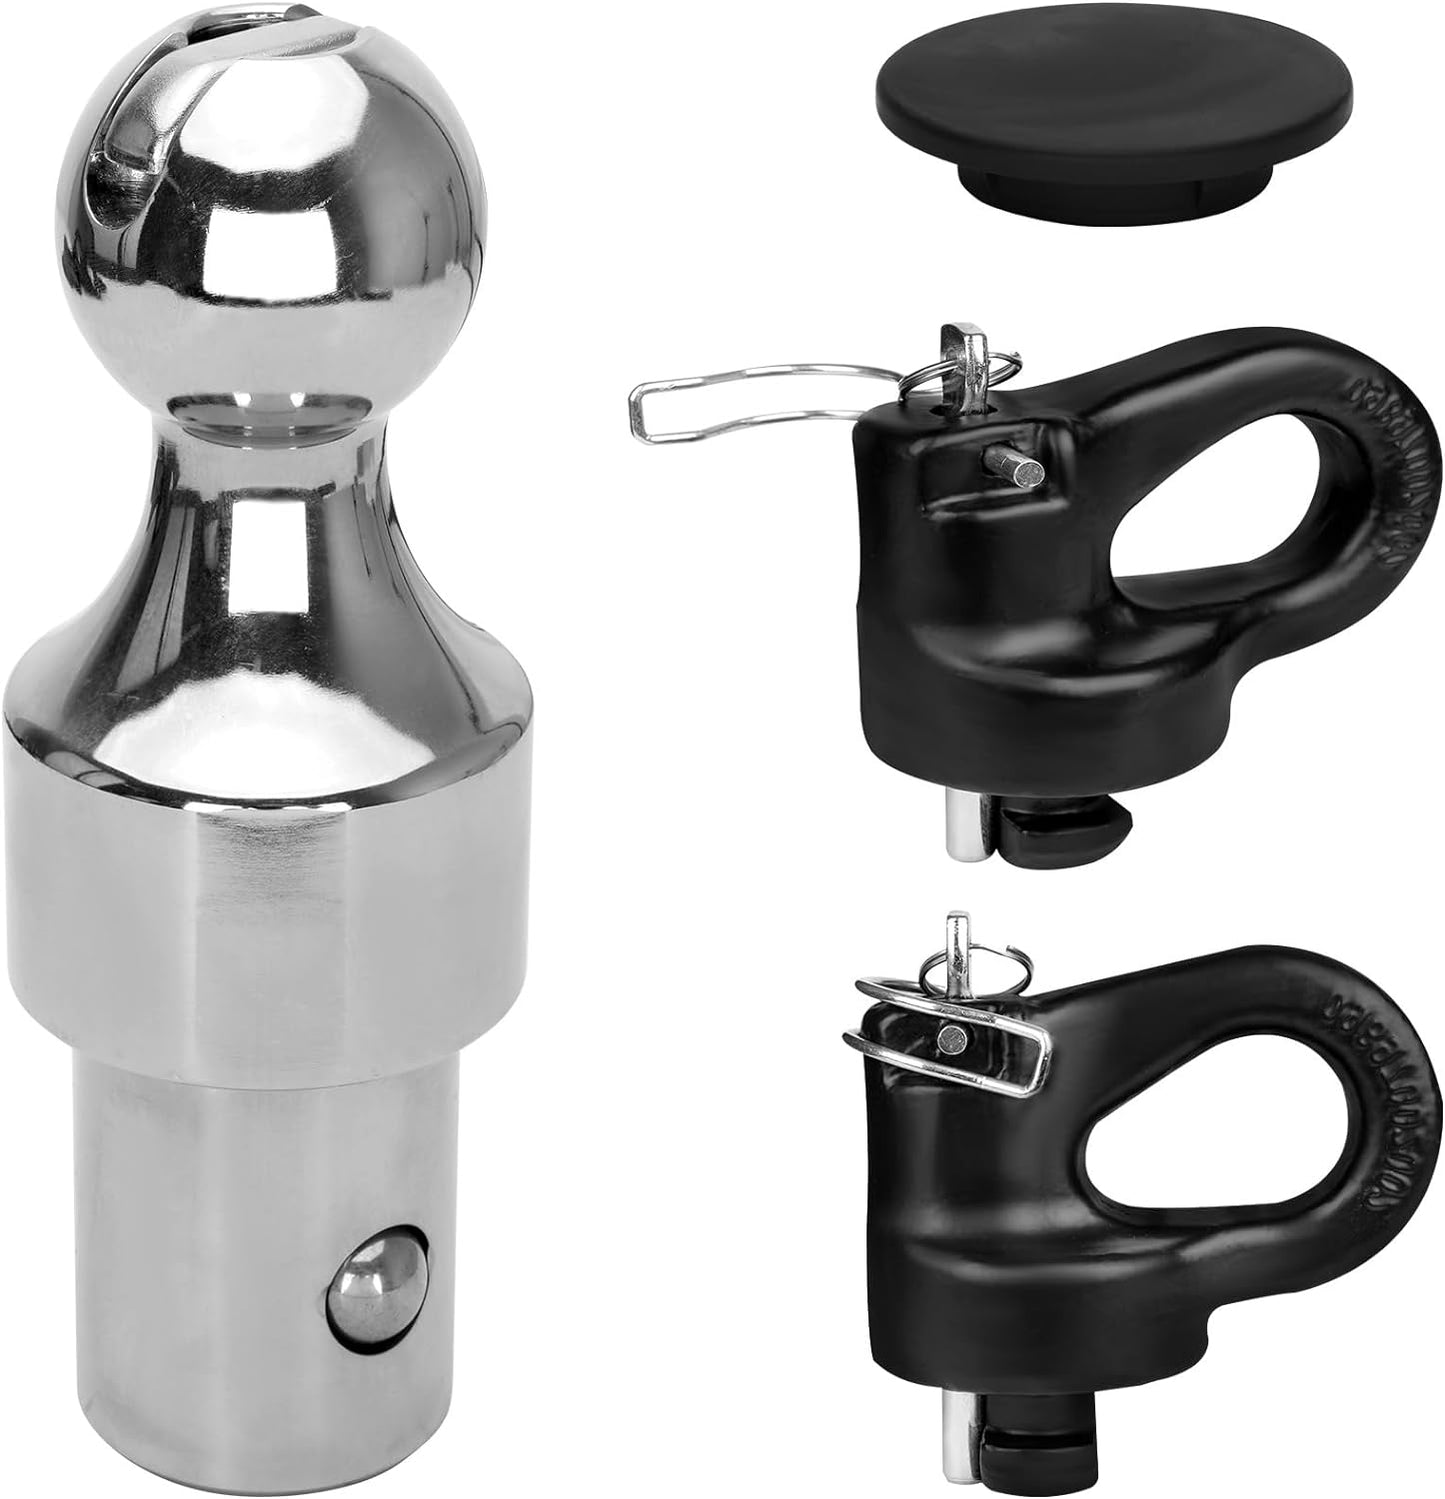 Chaoos 60692 Puck System Gooseneck Hitch Ball Kit, 2 5/16-Inch Ball 30000lbs GTW/7500 lbs VTW